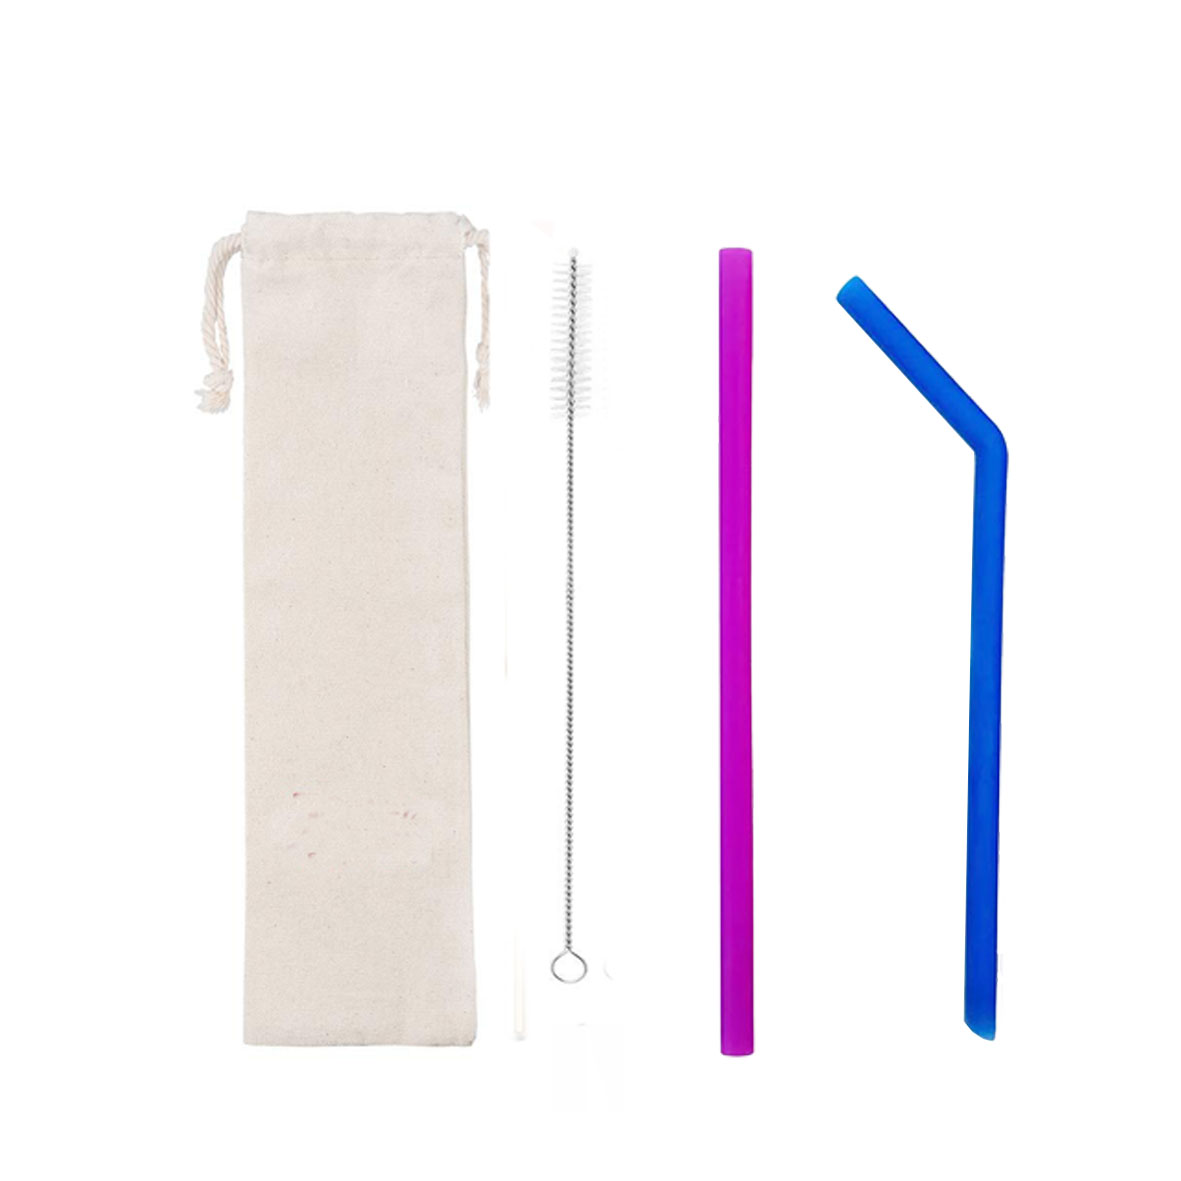 GL-AAJ1094 3 in 1 Drinking Silicone Straws Set with Cleaning Brush